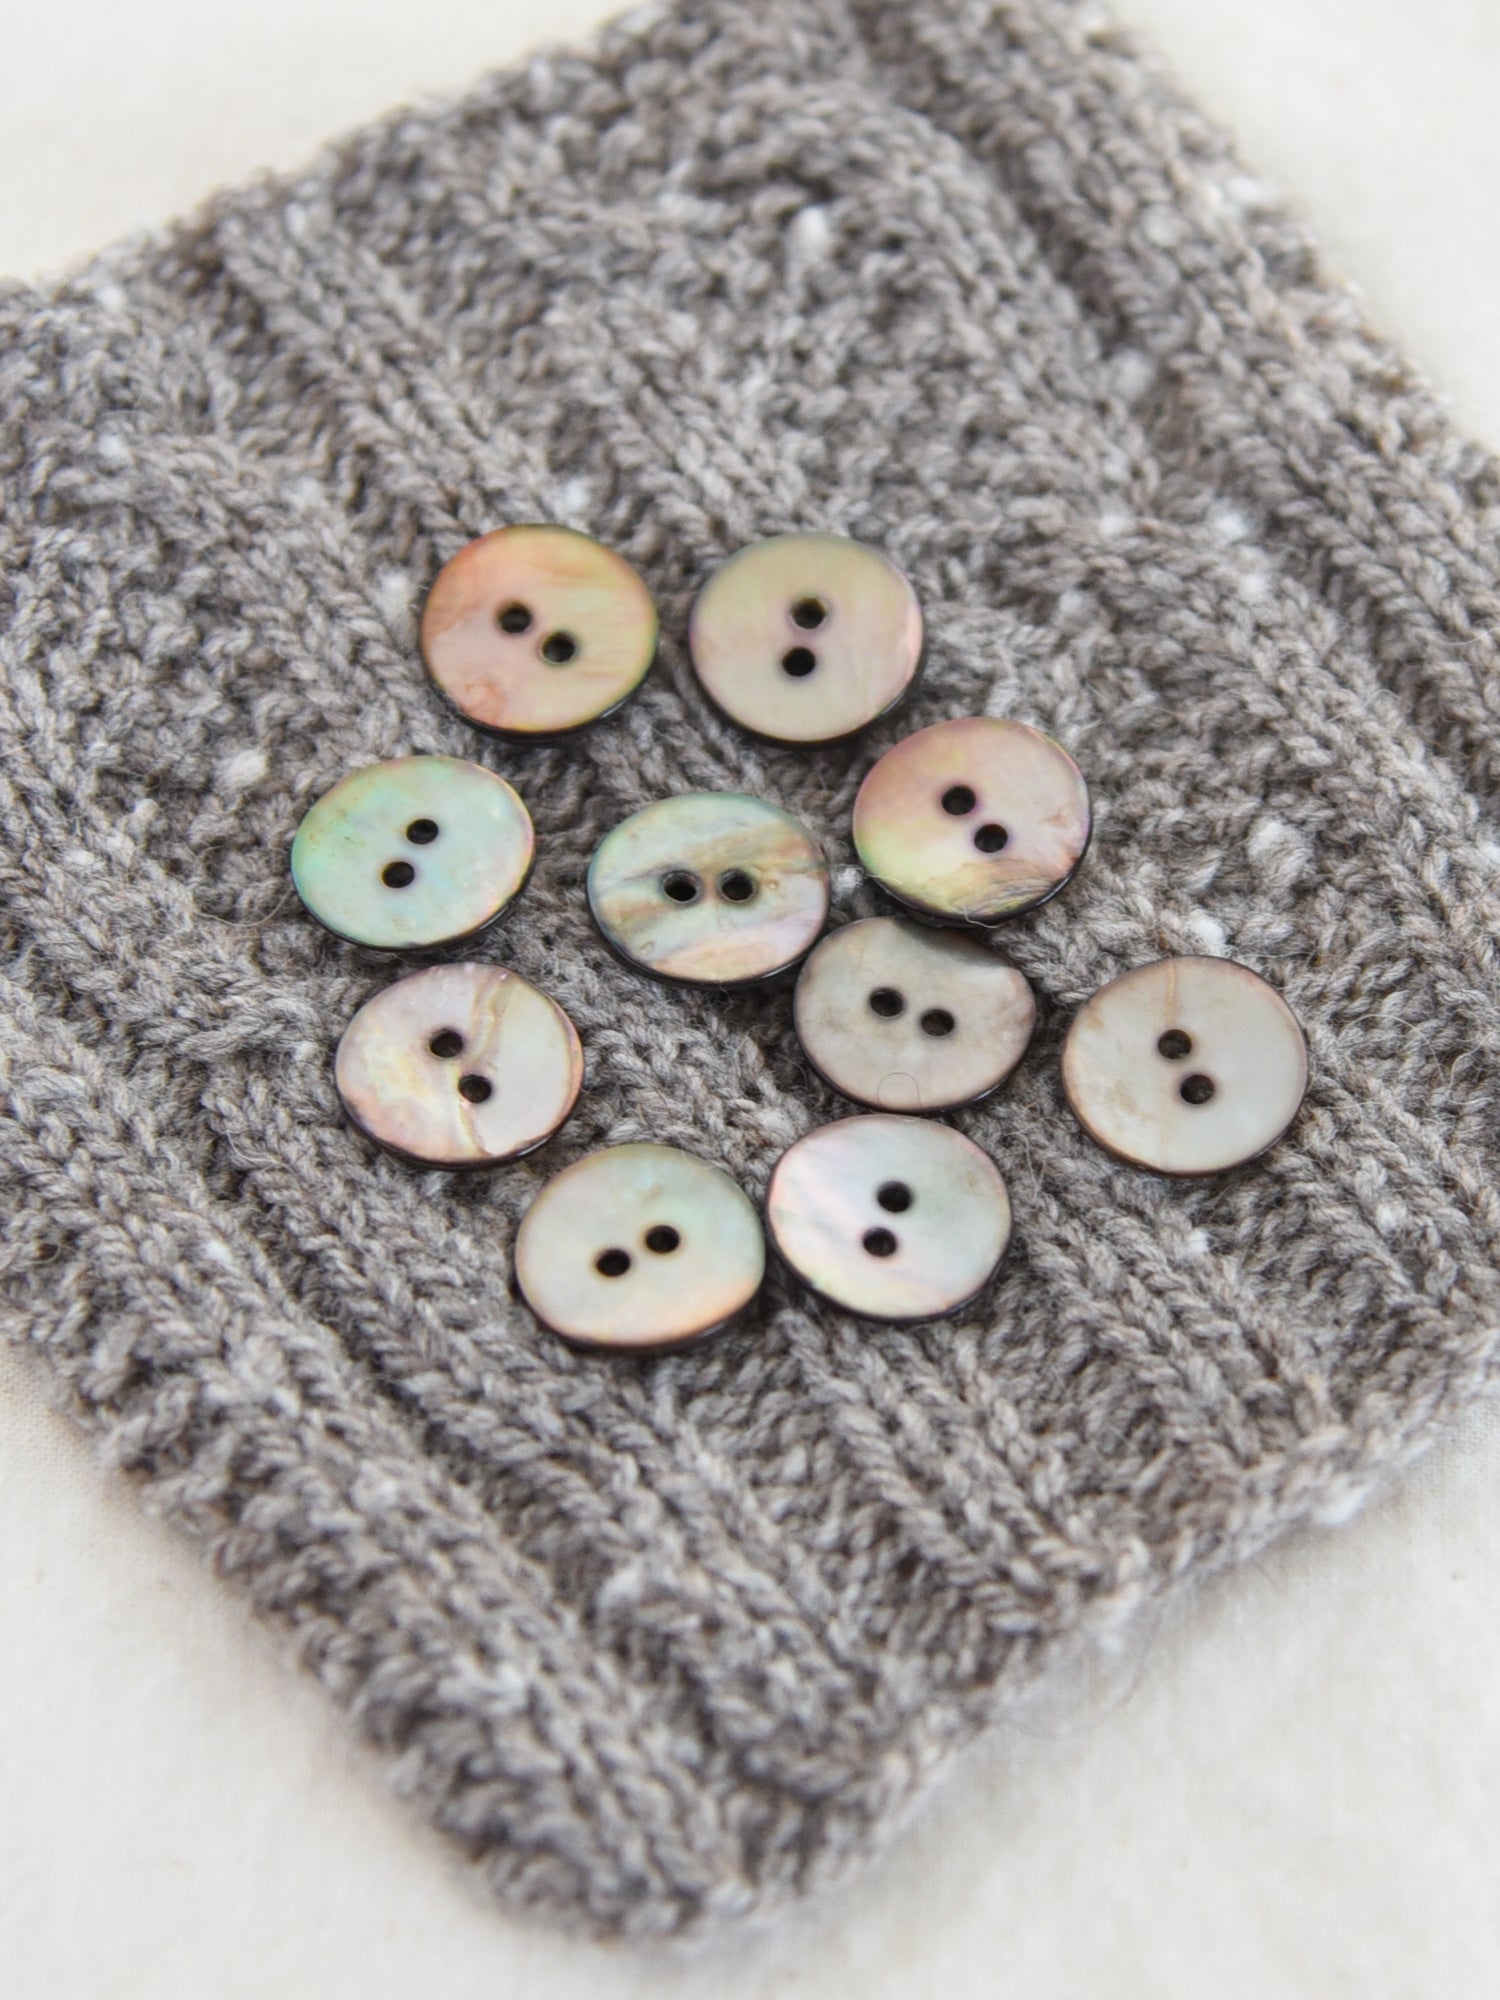 Brown Agoya Shell Buttons